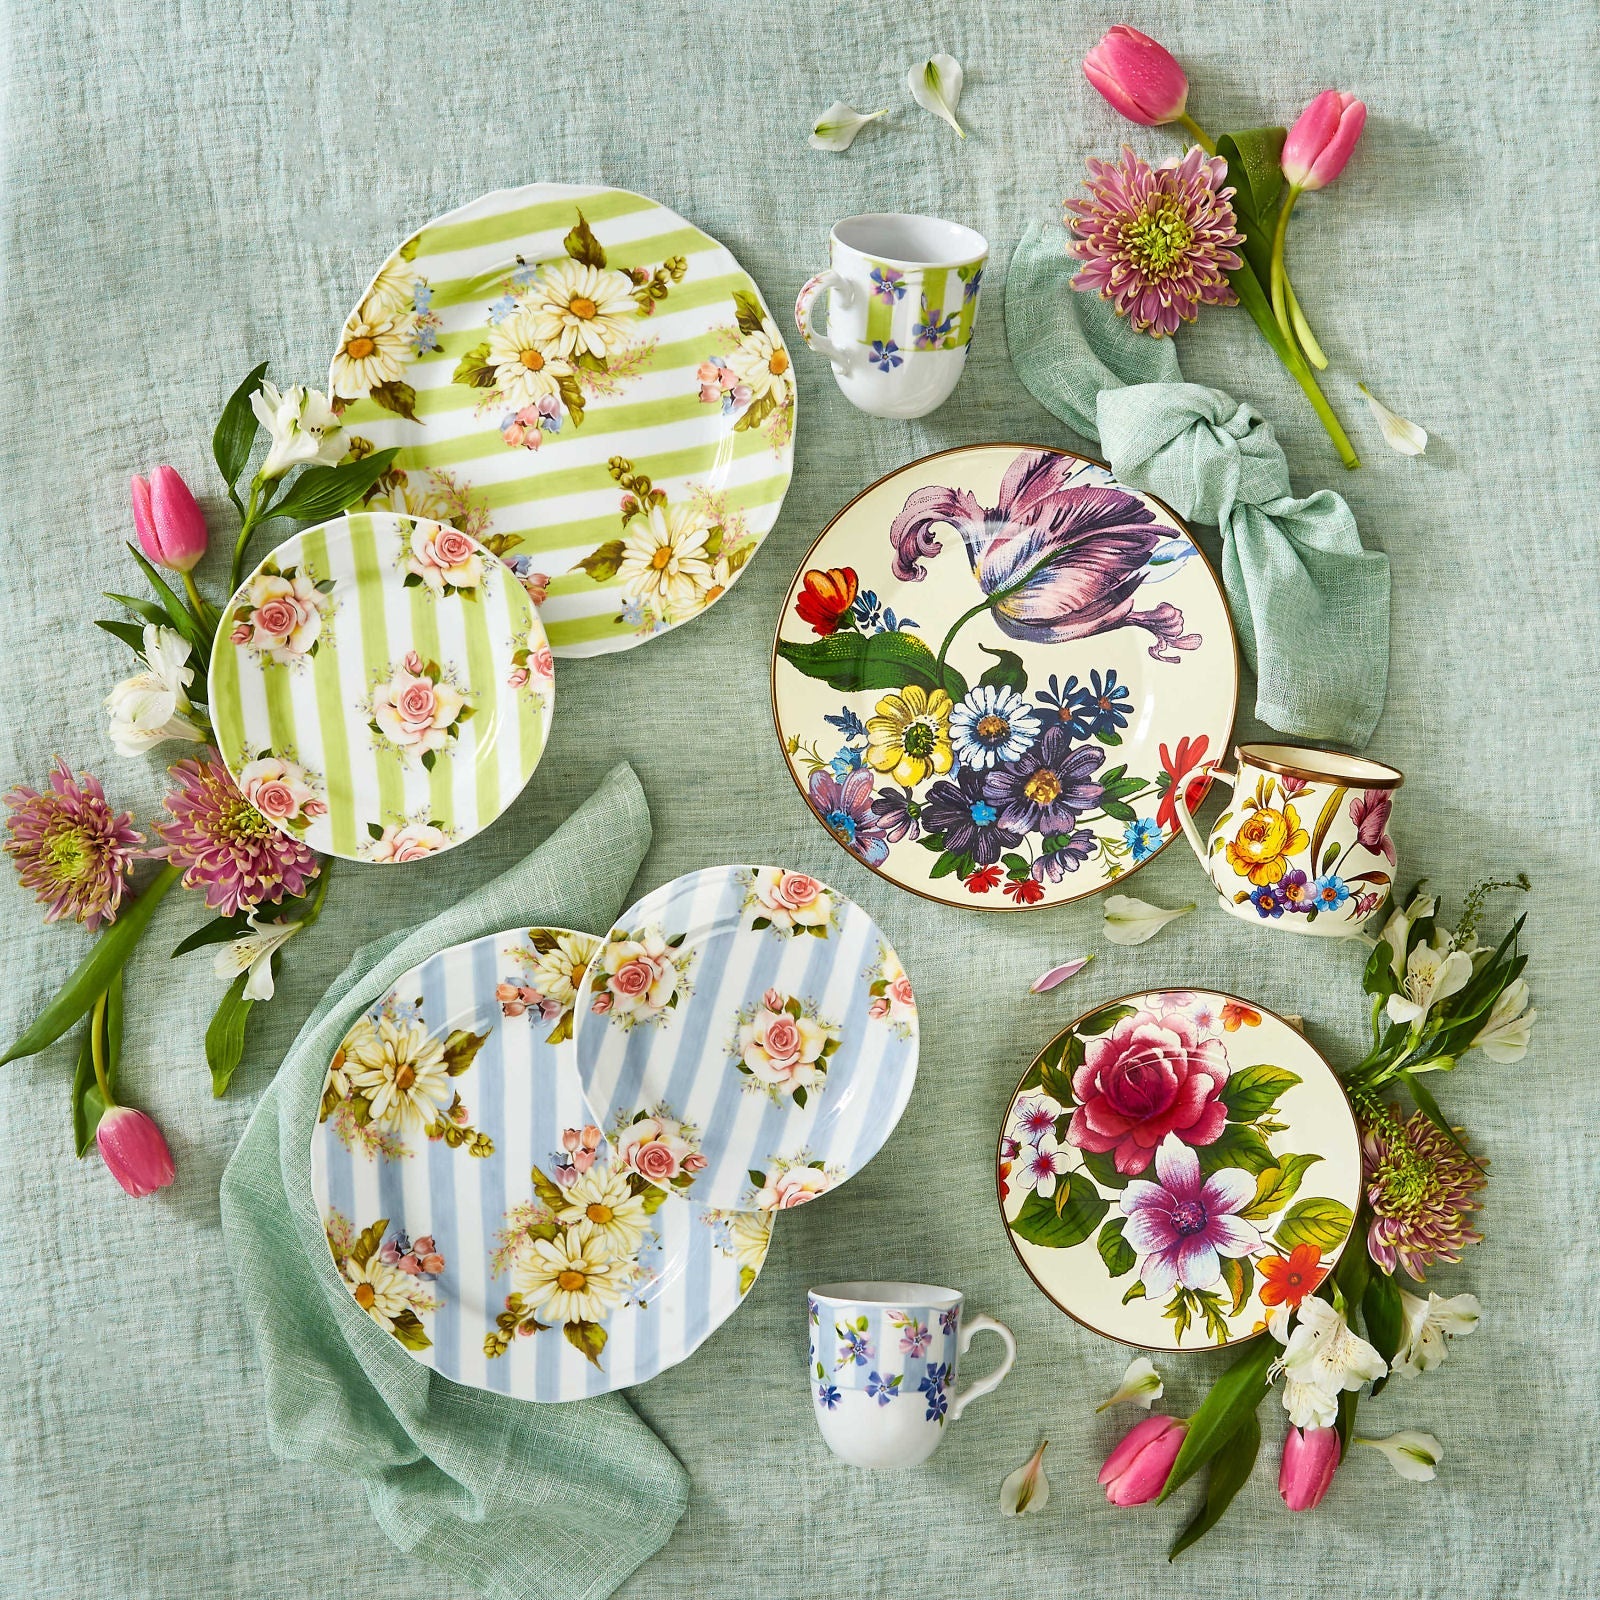 Wildflowers Porcelain Dinner Plate Green by Mackenzie-Childs - |VESIMI Design| Luxury and Rustic bathrooms online